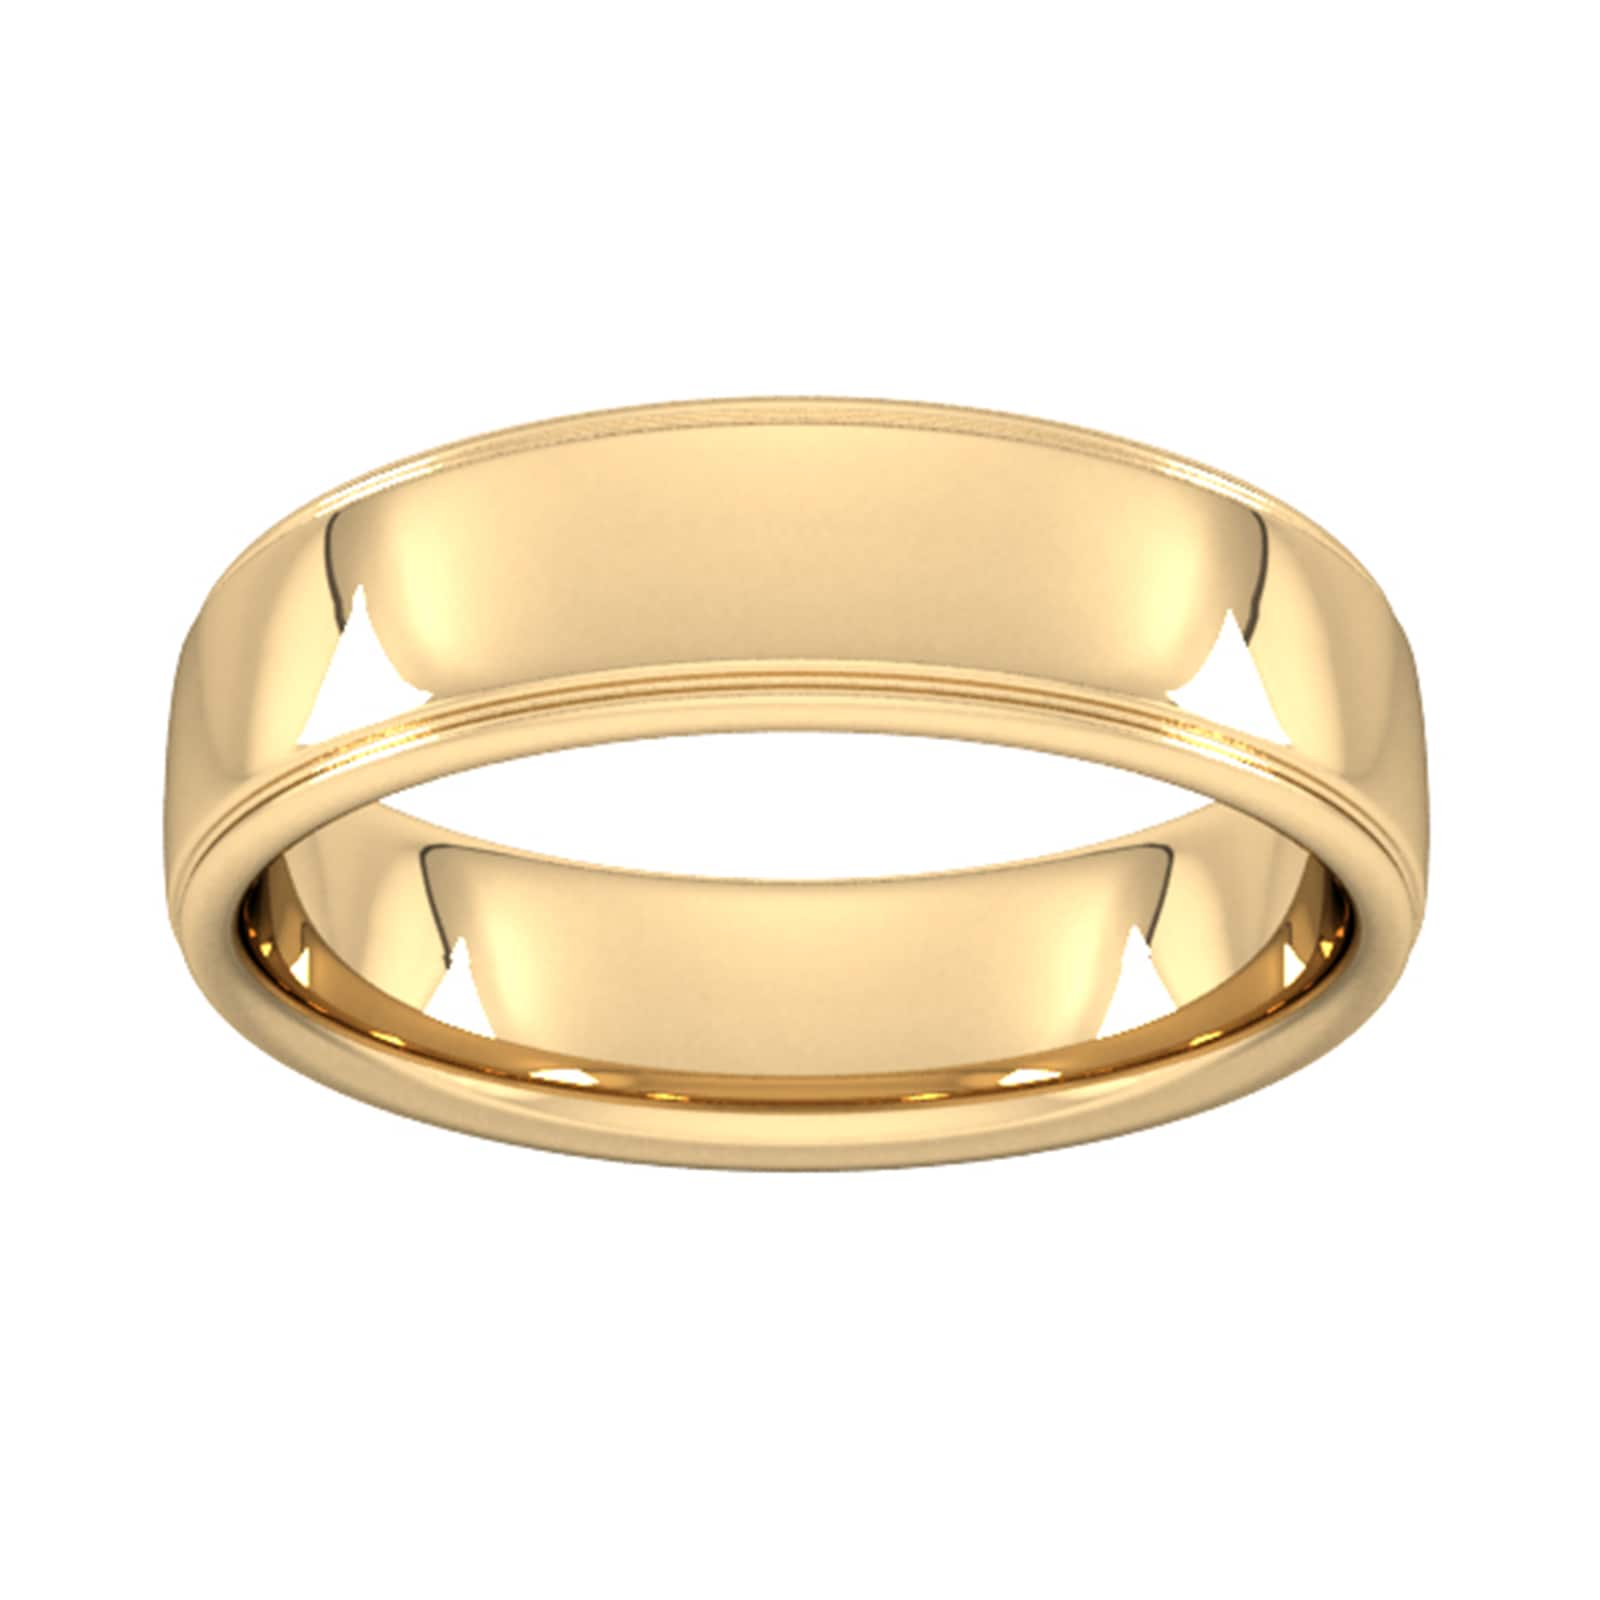 6mm Slight Court Heavy Polished Finish With Grooves Wedding Ring In 18 Carat Yellow Gold - Ring Size Q